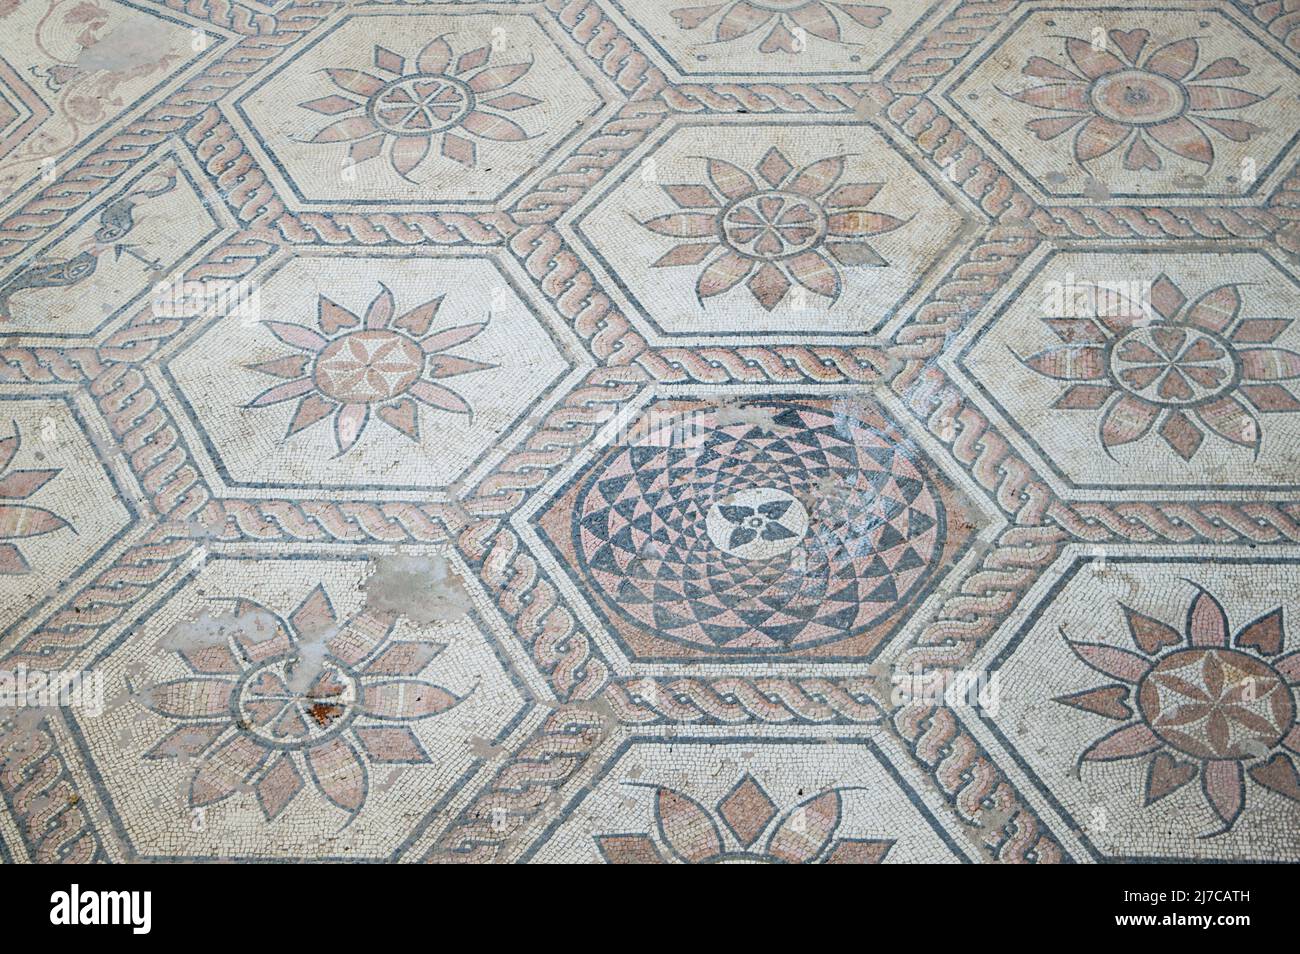 Ancient roman floor mosaic with mythological scene, called The Punishment of Dirce, found in Pula, Croatia Stock Photo